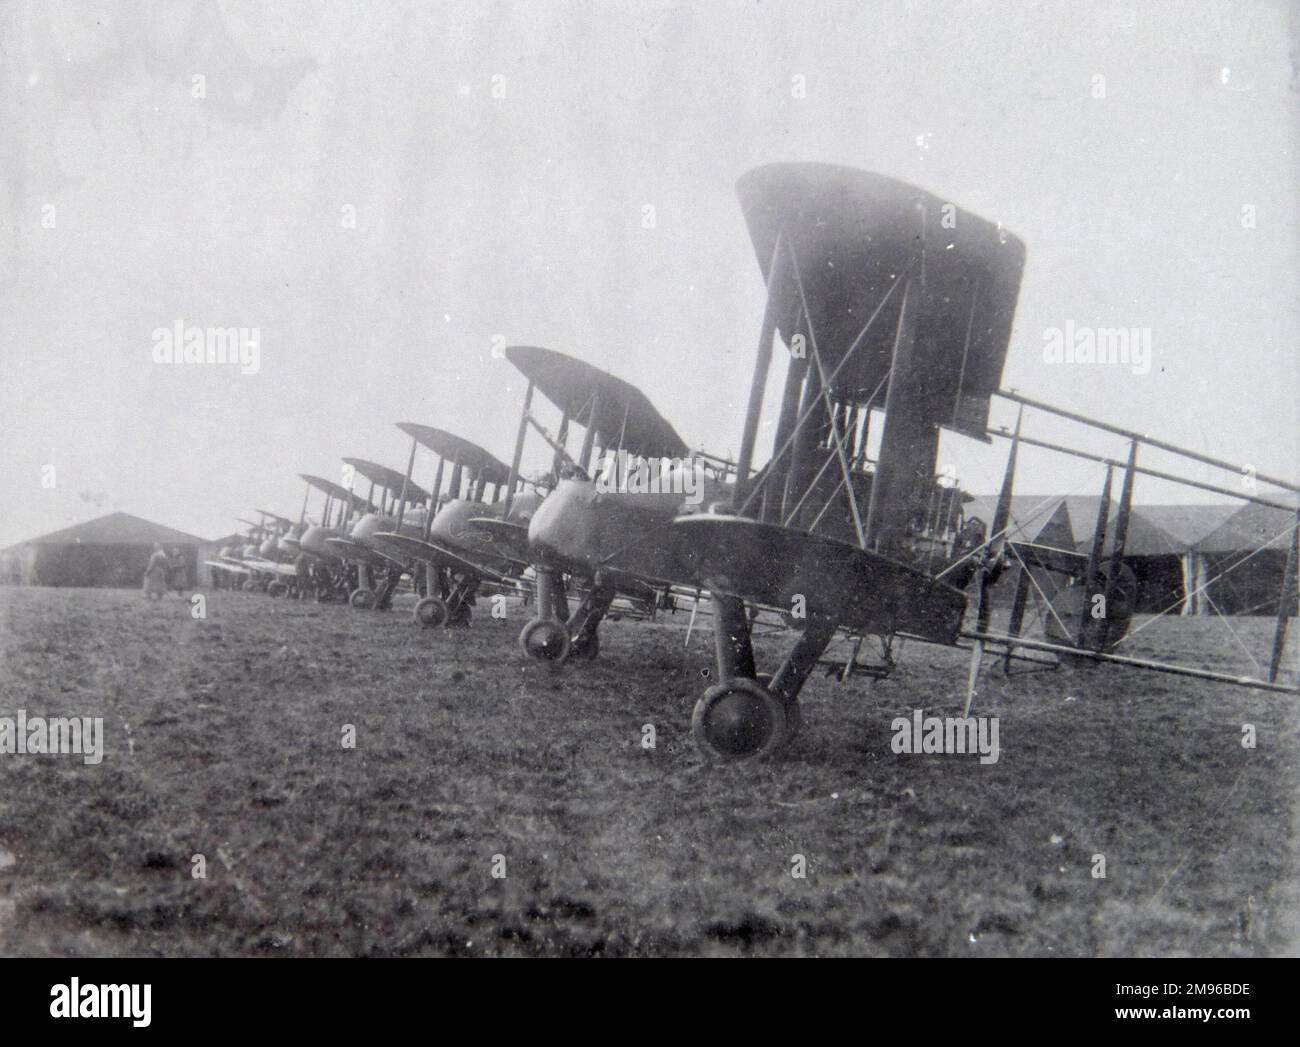 A line of WW1 aircraft in a field after the end of the war (Royal Aircraft Factory F.E.2), awaiting conversion to civilian use. Stock Photo